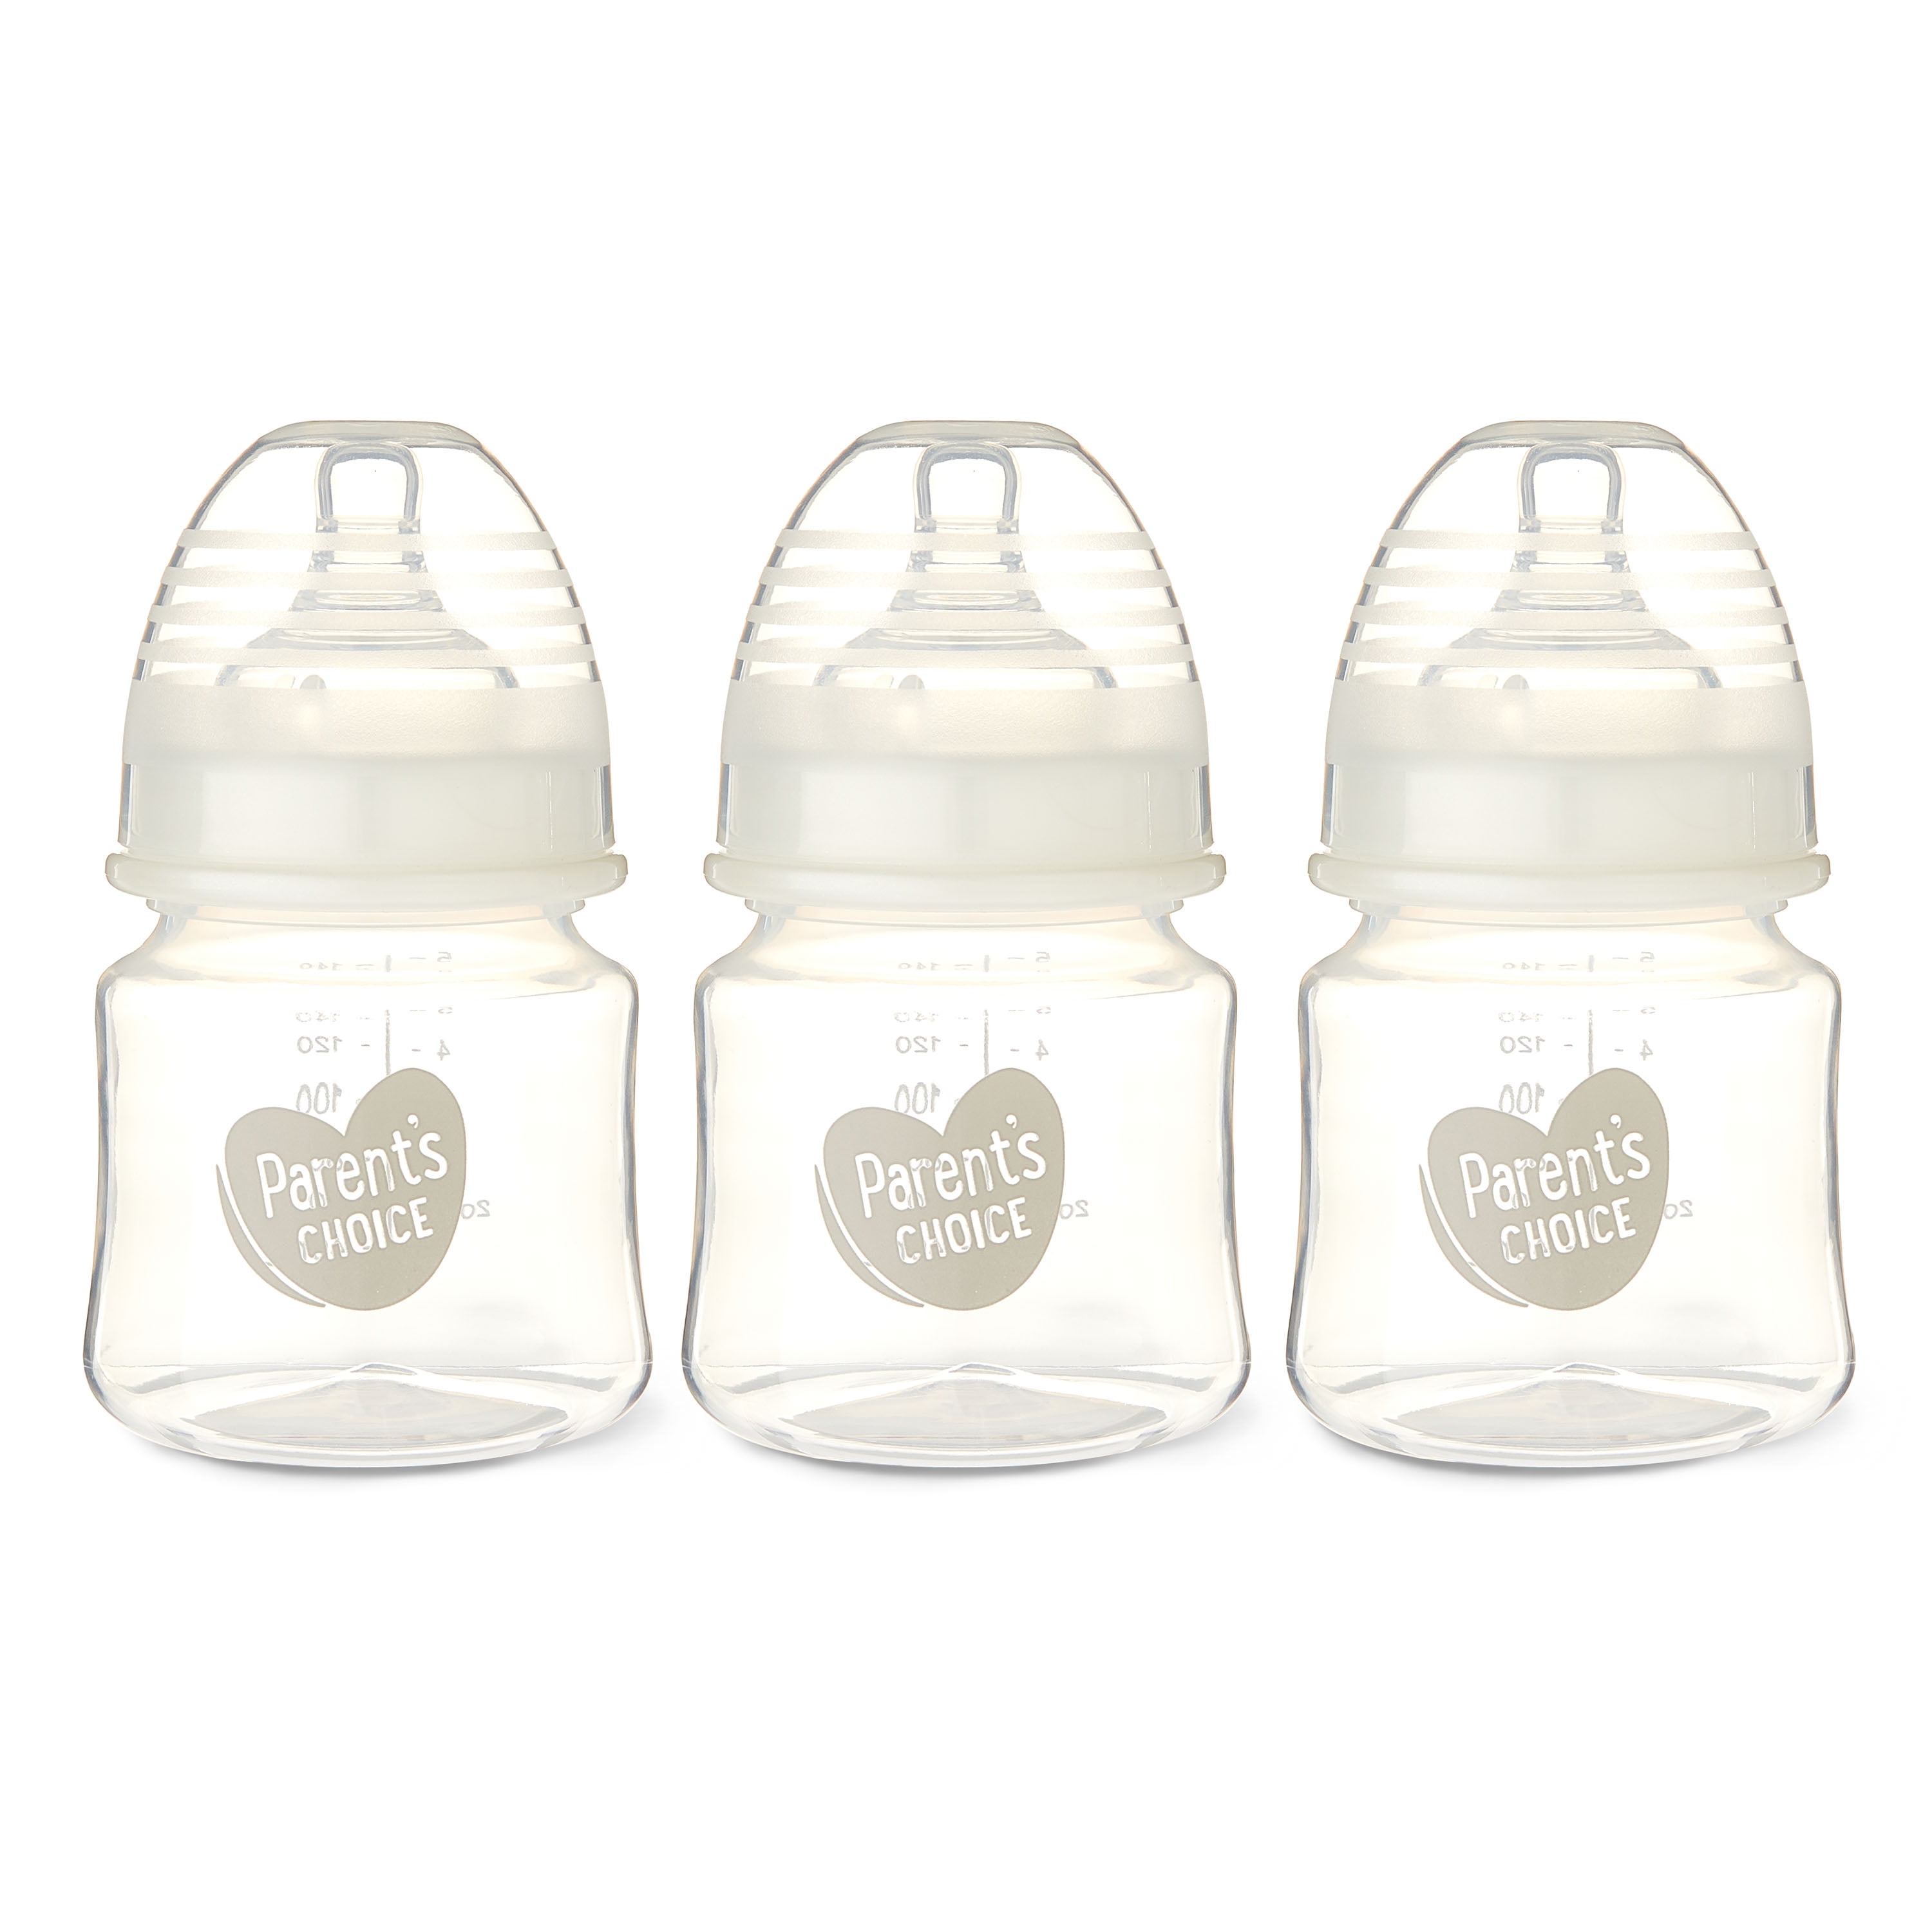 KidMoments Set of 12 5oz Glass Baby Food Containers, Baby Food